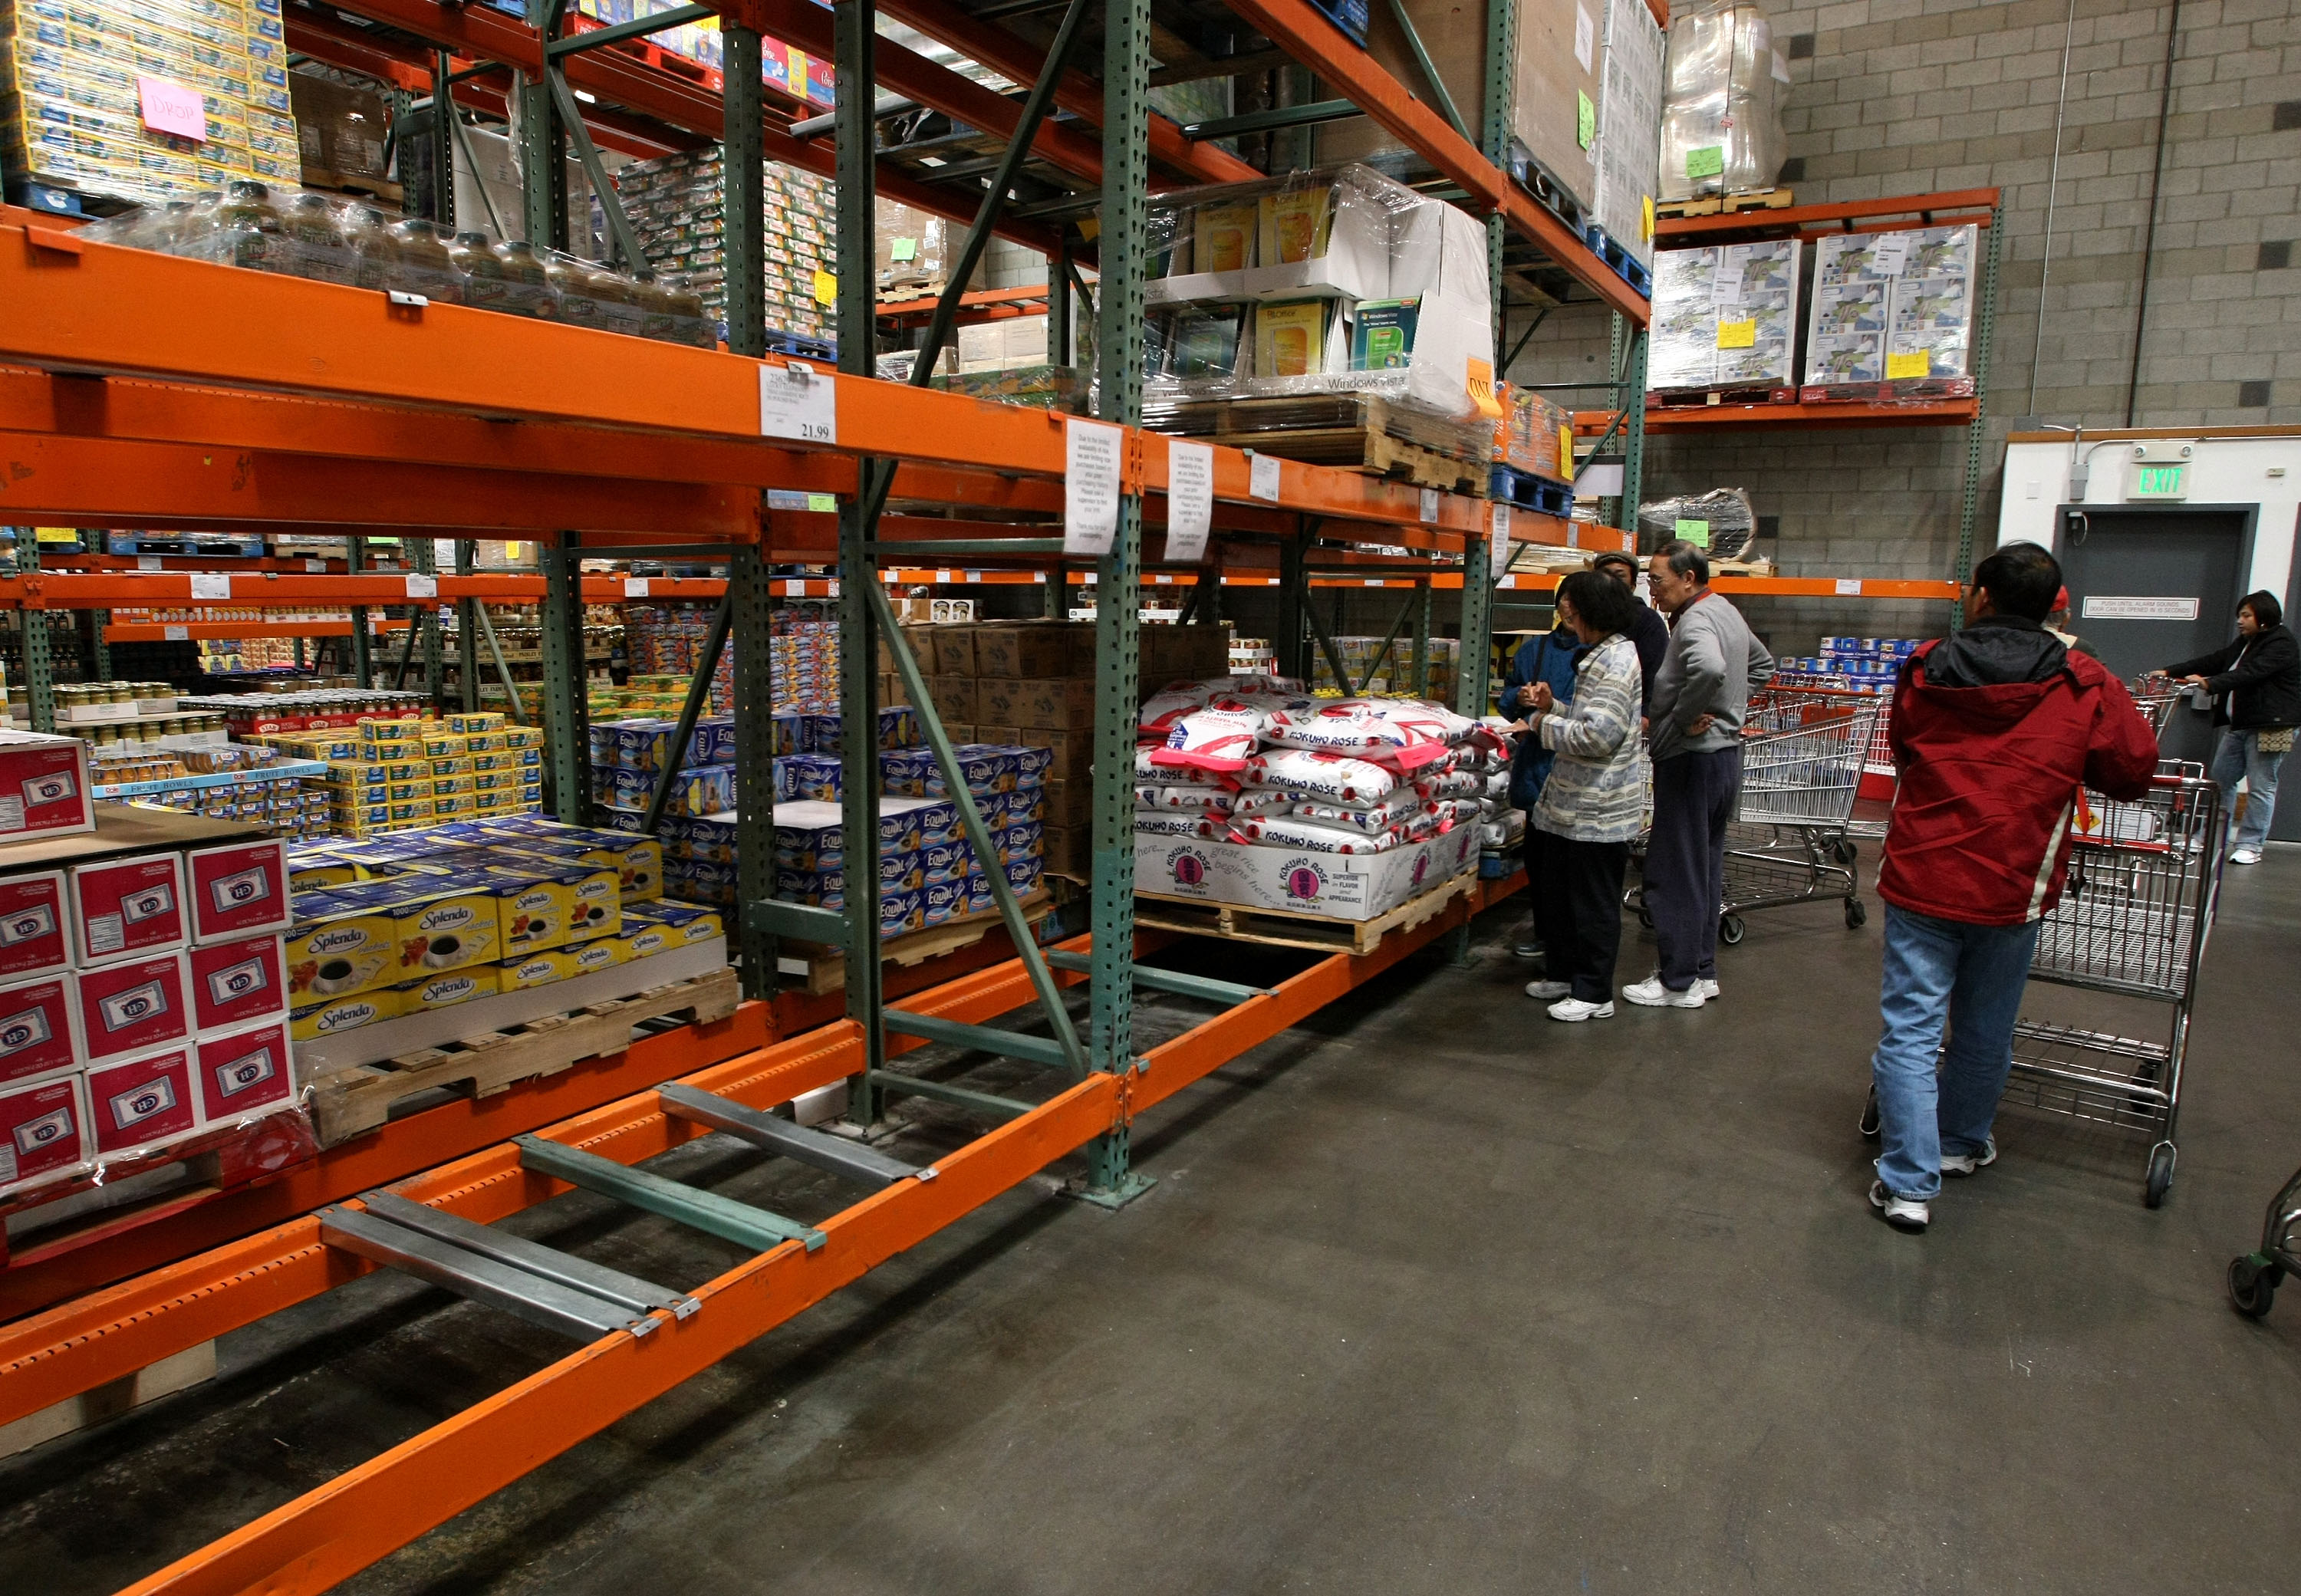 Warehouse clubs can be a good place to stock up on staples, if the savings outweigh the membership fees.